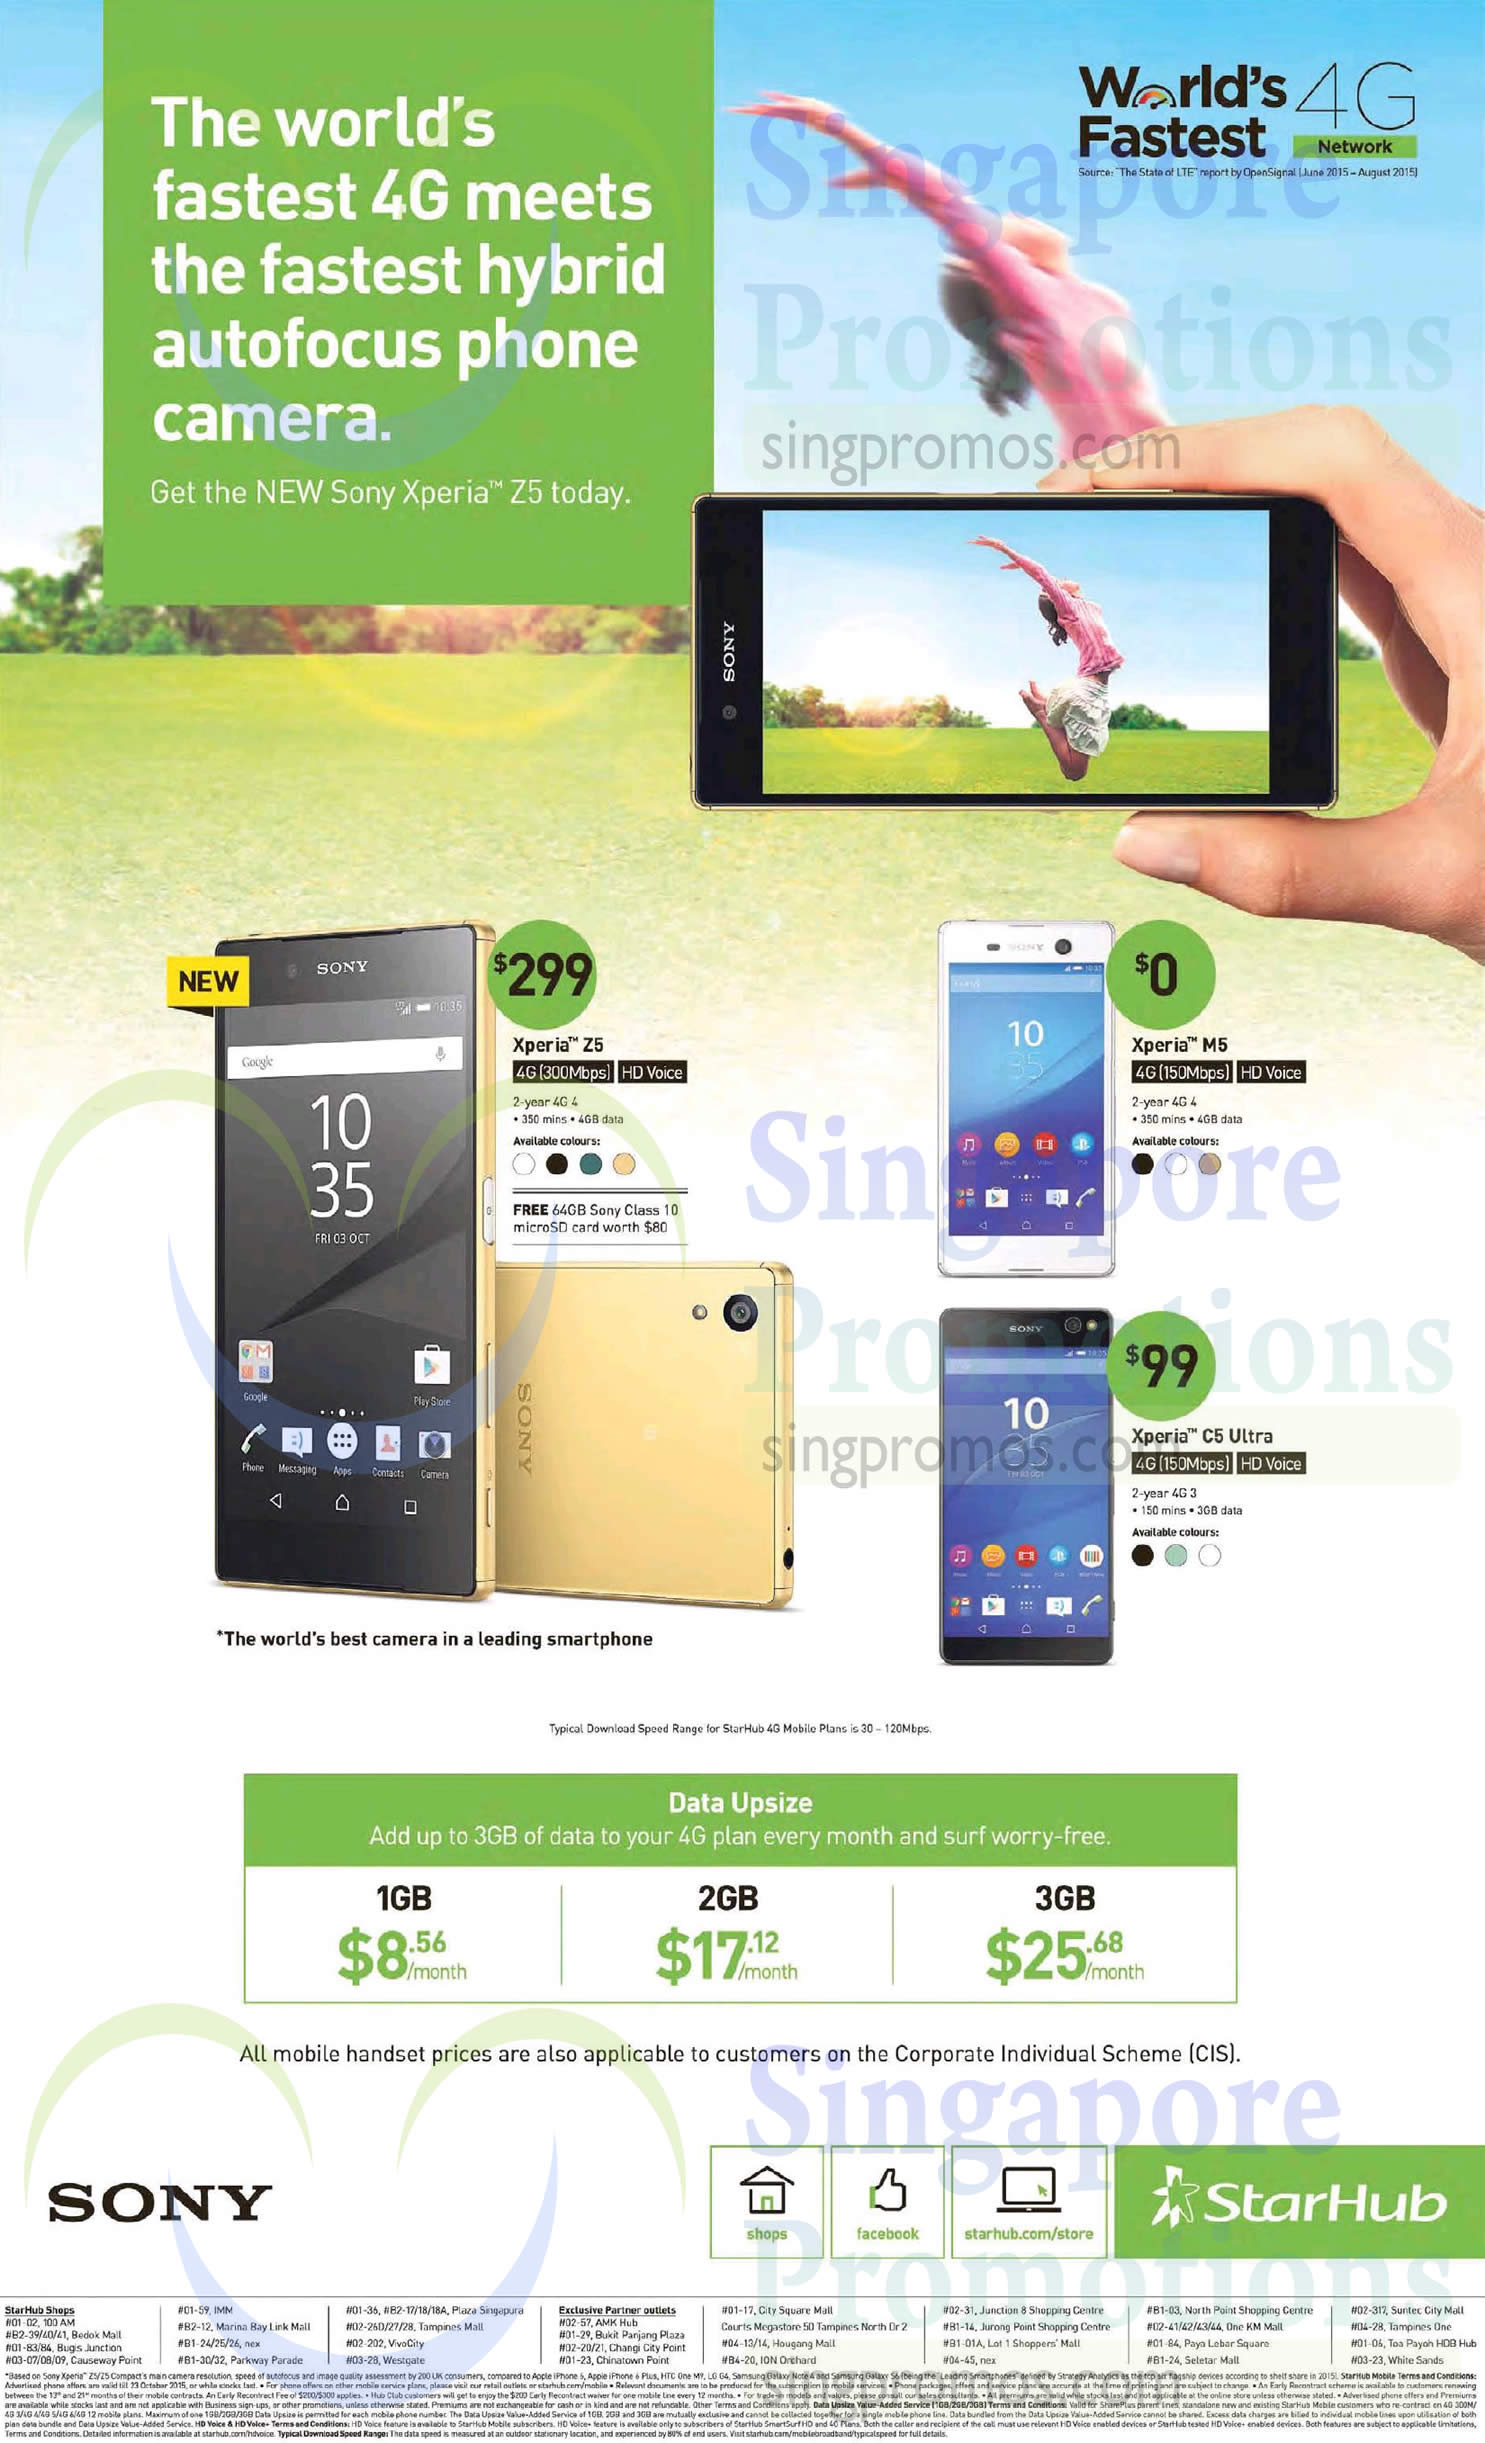 Featured image for Starhub Broadband, Mobile, Cable TV & Other Offers 17 - 23 Oct 2015